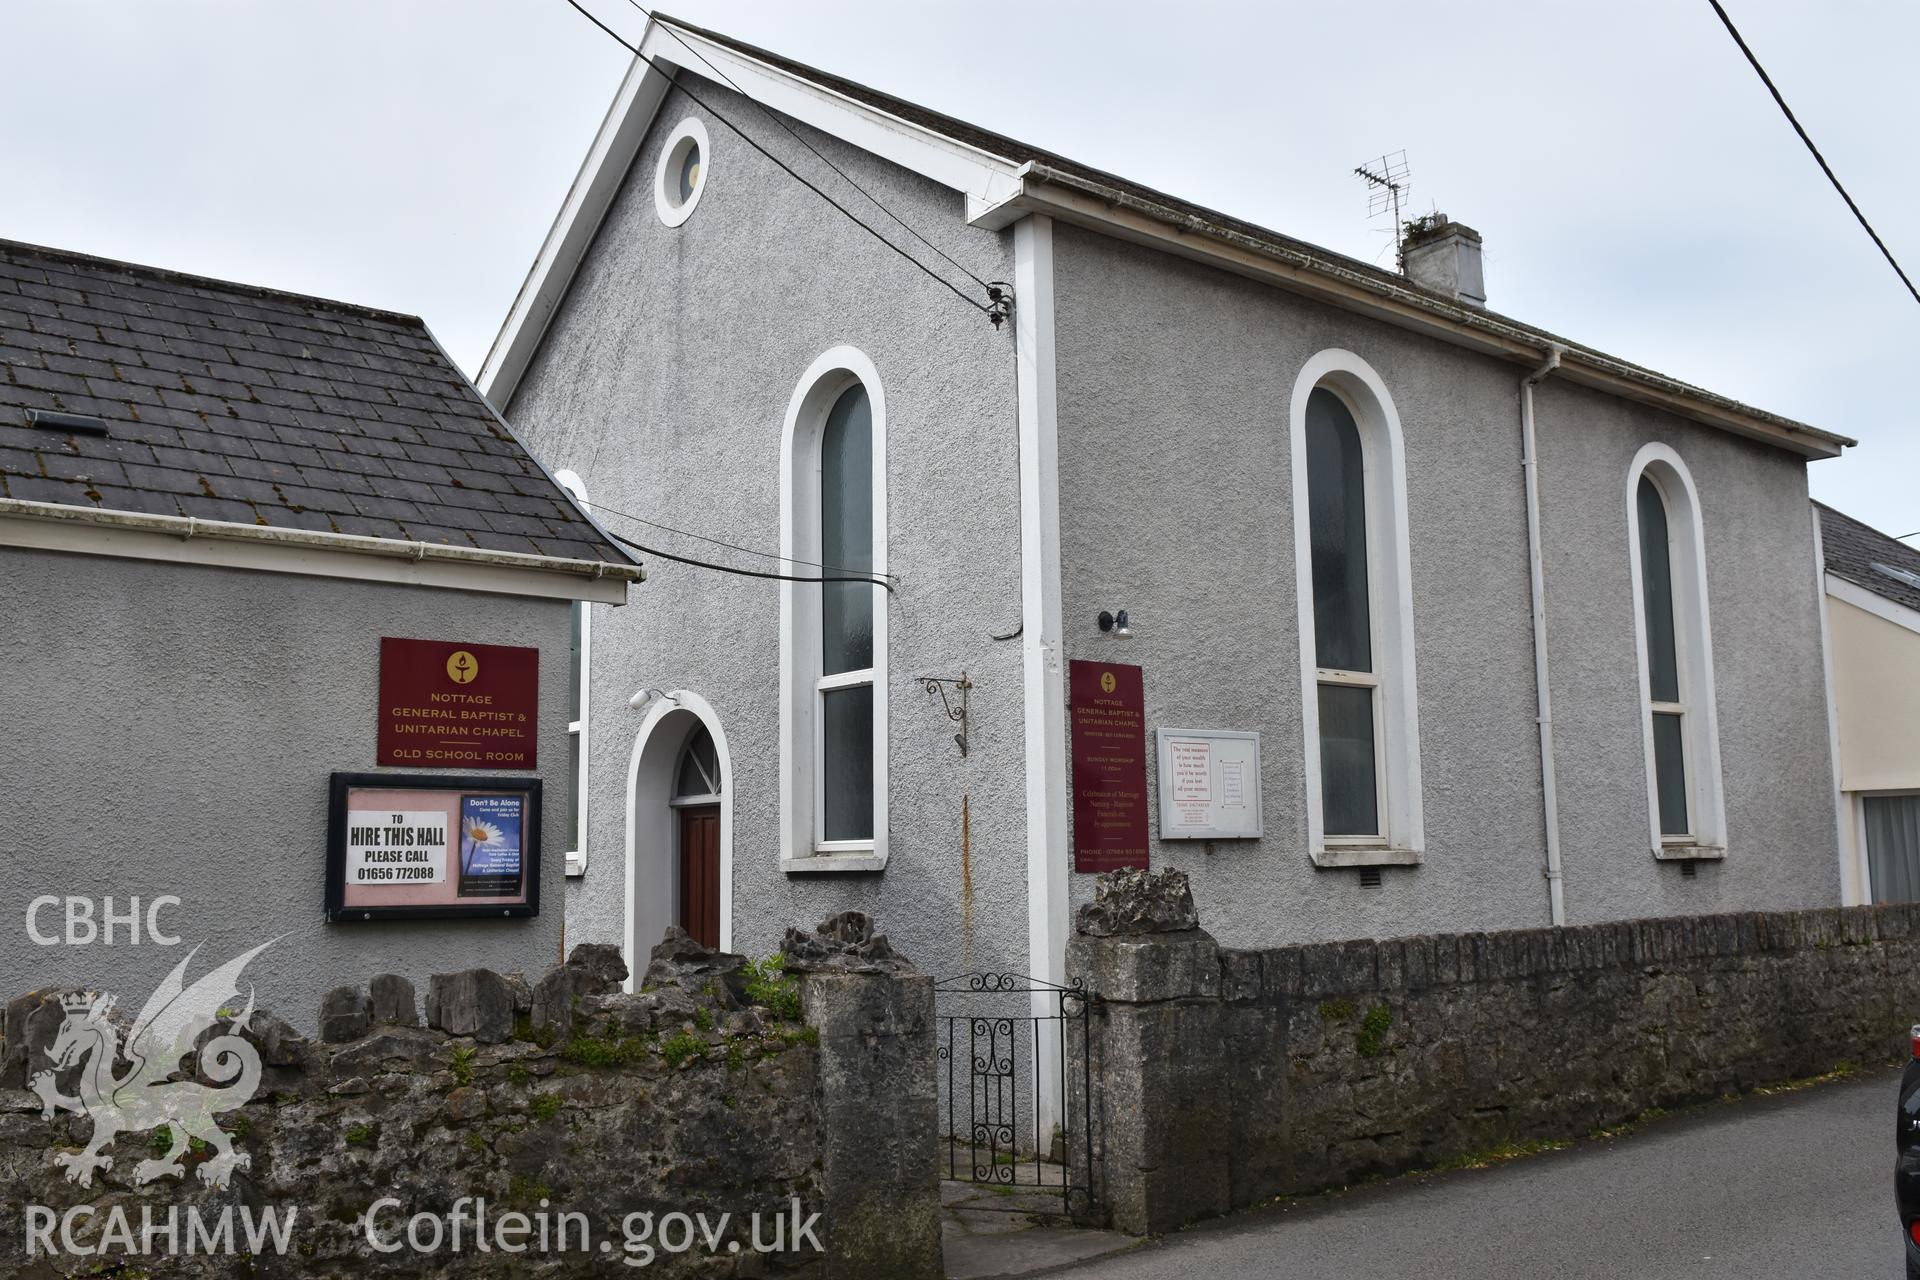 Colour photograph showing exterior view of Baptist & Unitarian Chapel, Nottage, Porthcawl, taken during photographic survey conducted by Sue Fielding on 12th May 2018.